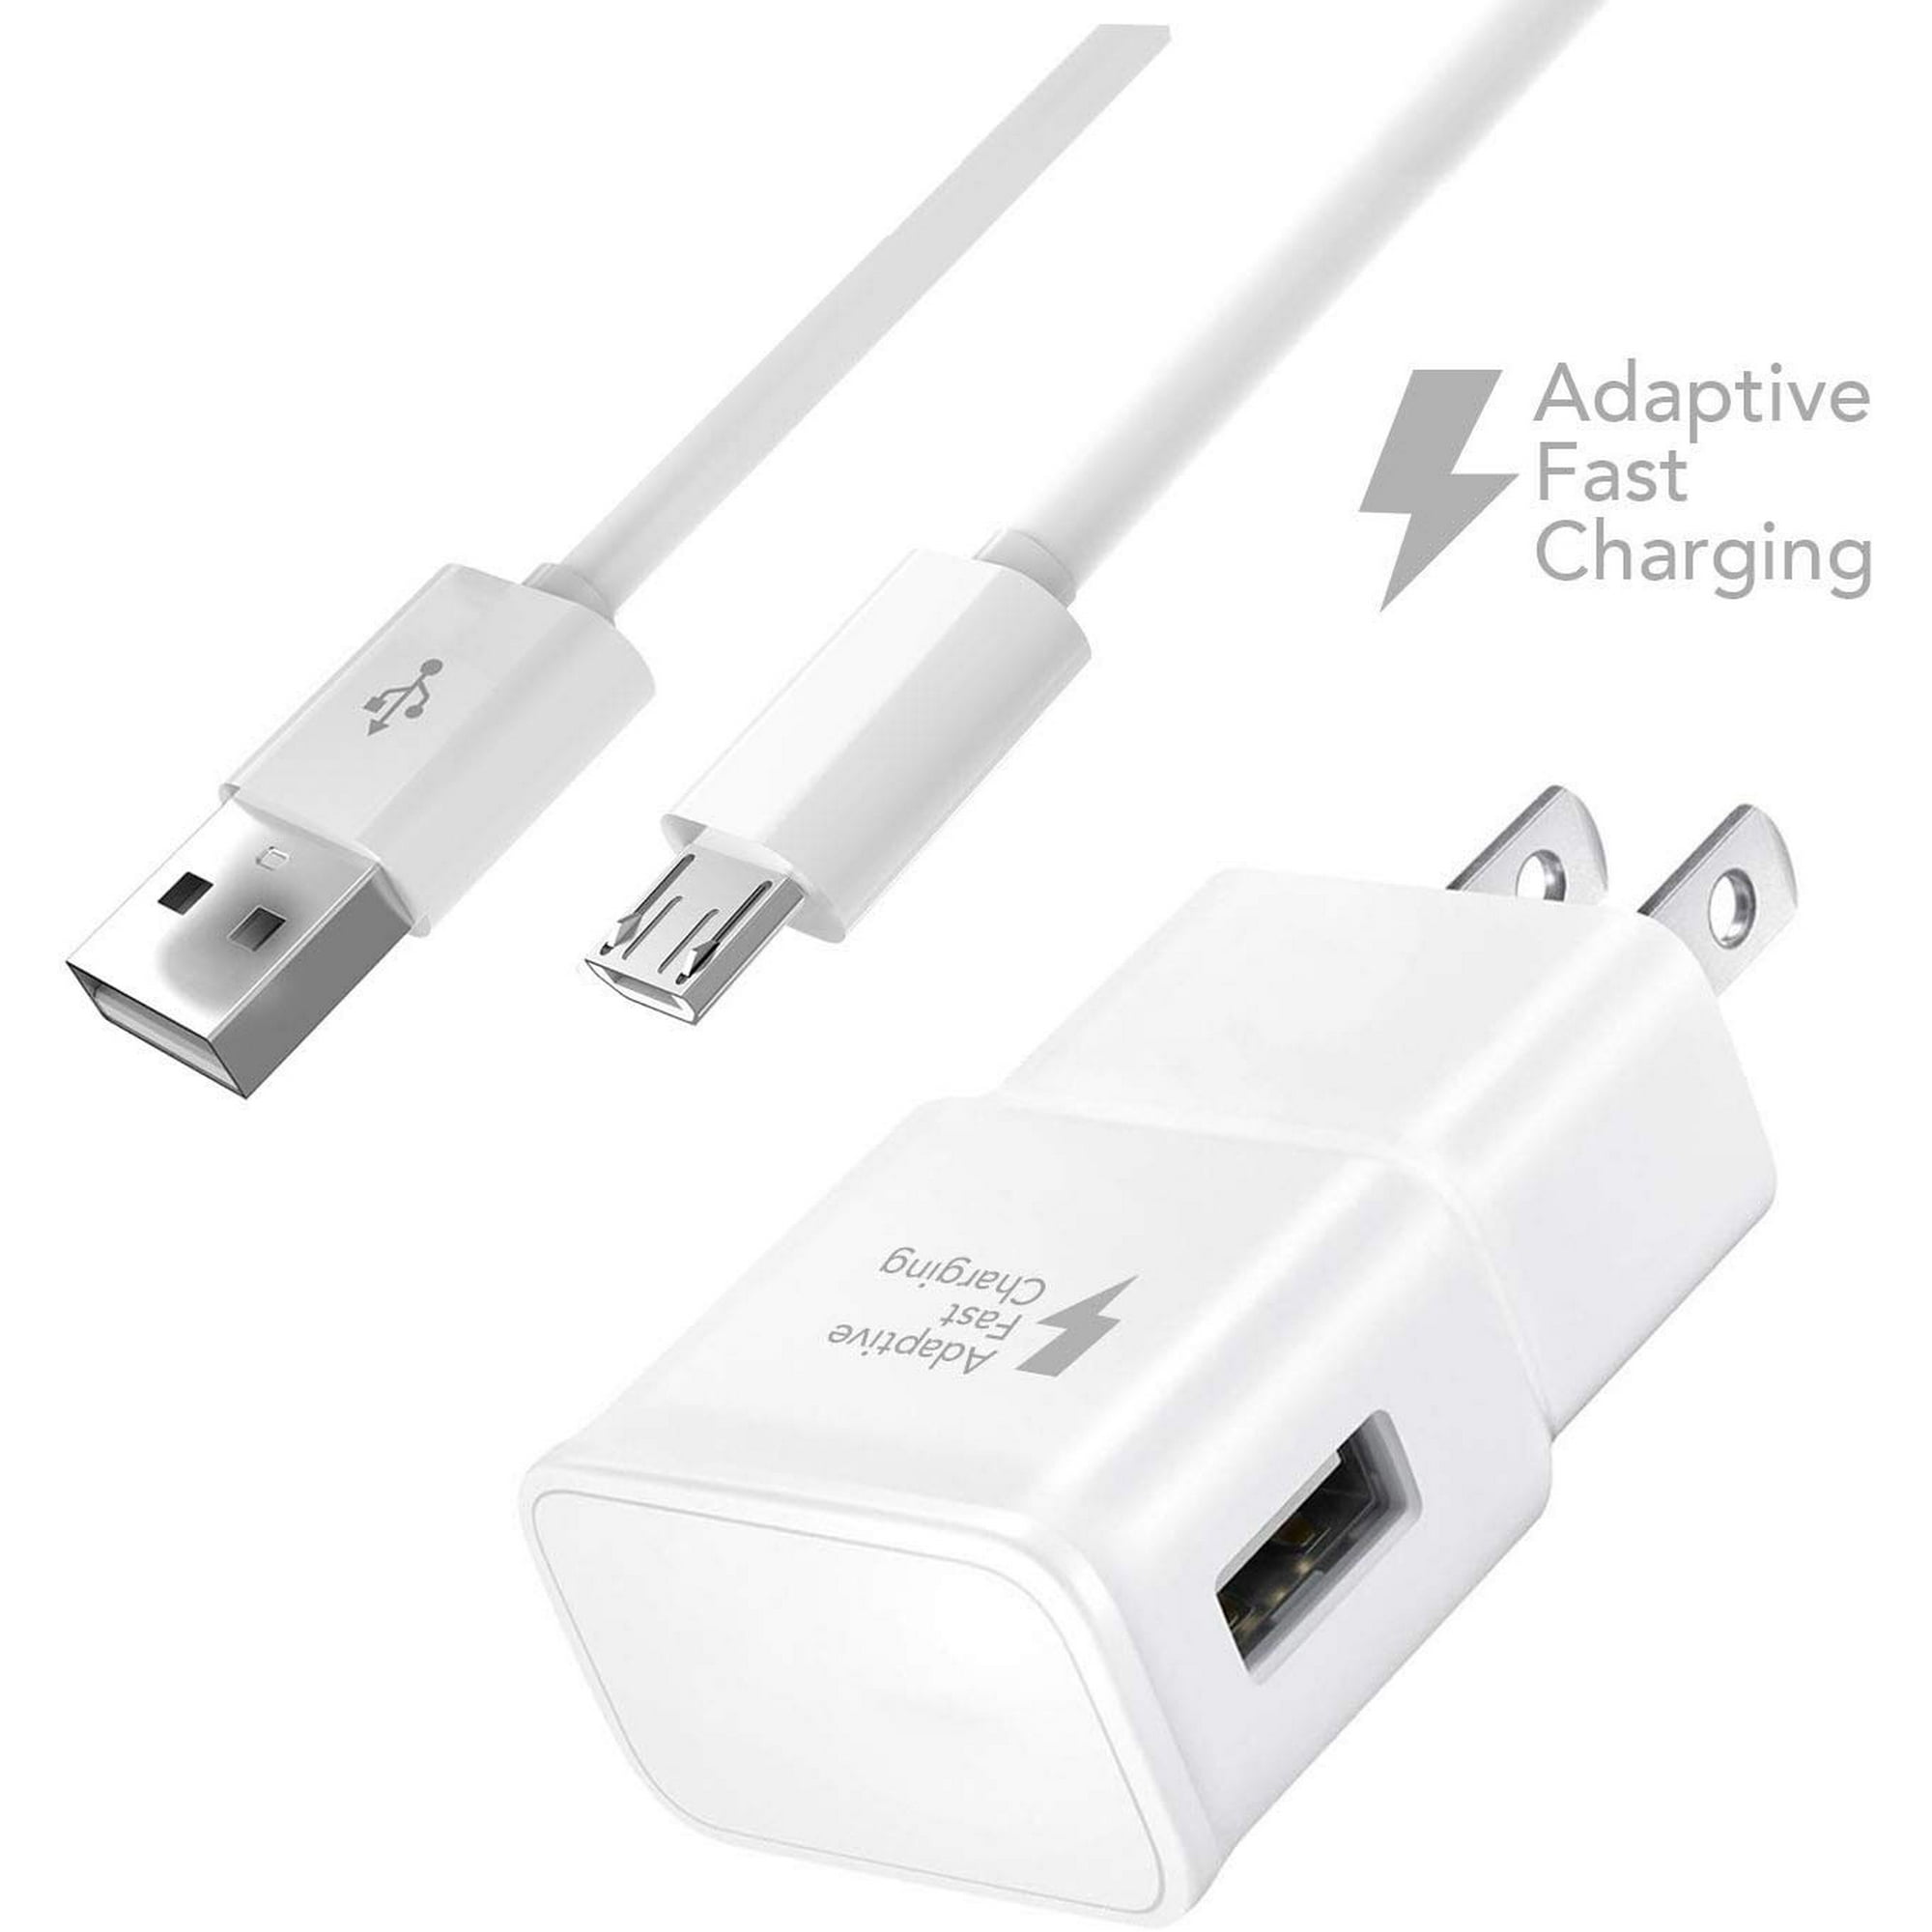 Samsung Galaxy S5 Active Charger Fast USB 2.0 Cable Kit by Ixir - { Fast Wall Charger Cable} -